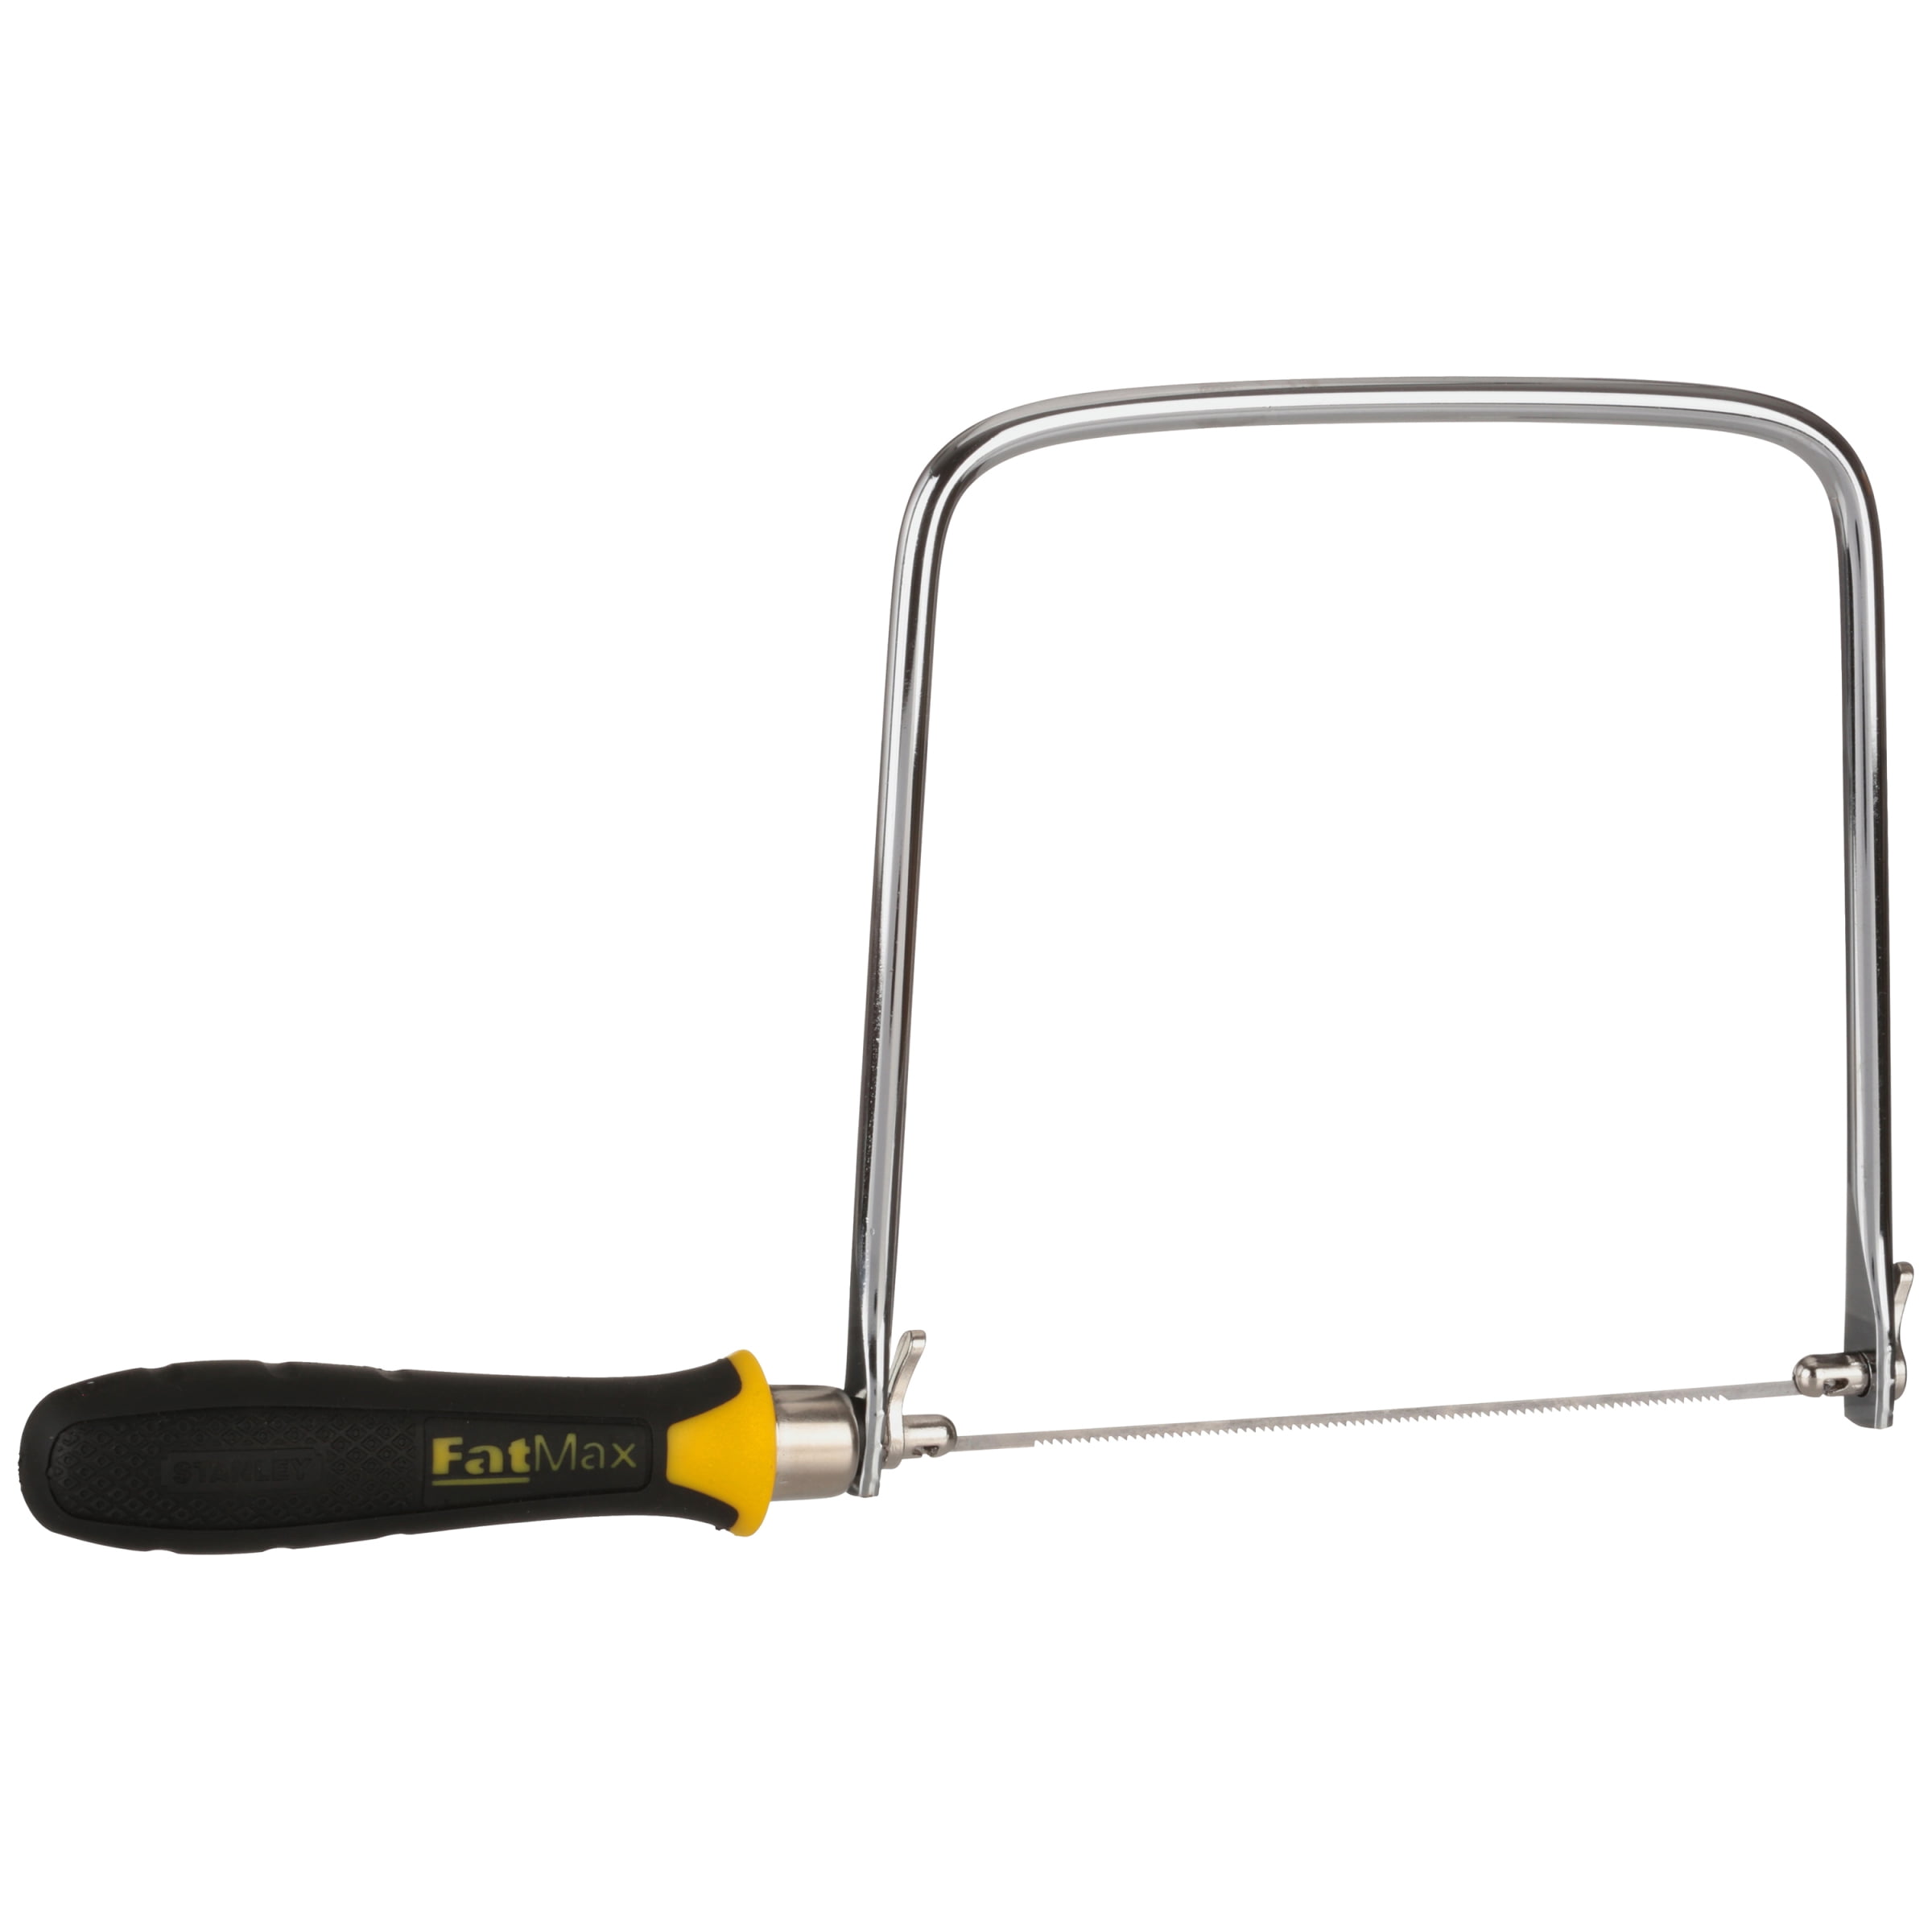 Stanley Tools Coping Saw with Extra Blades, 6.75